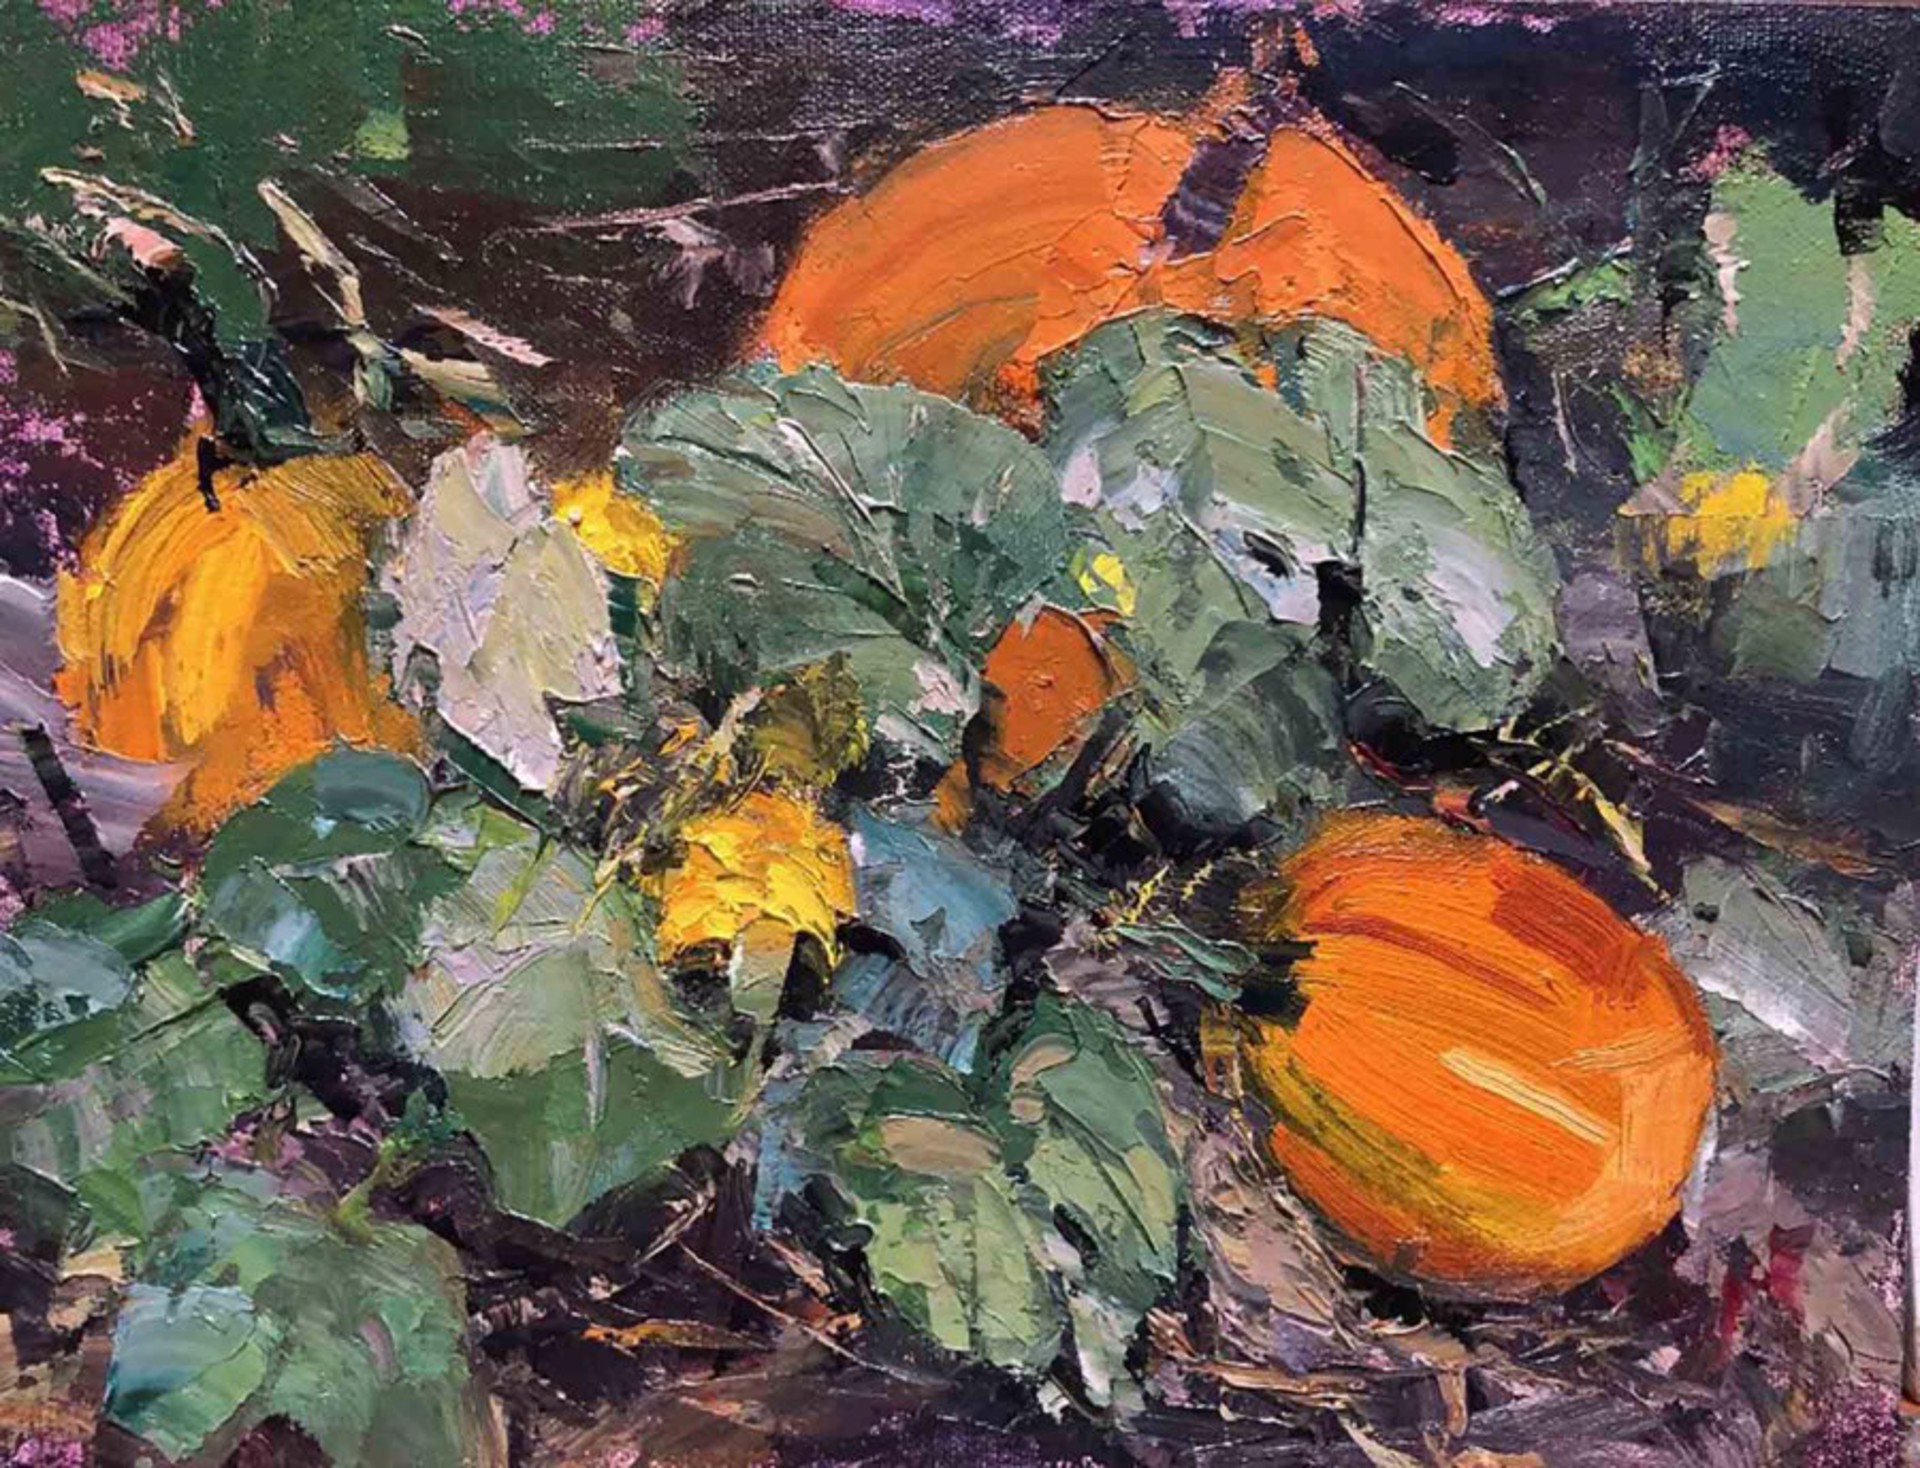 At the Day Road Pumpkin Patch by Jane Wallis